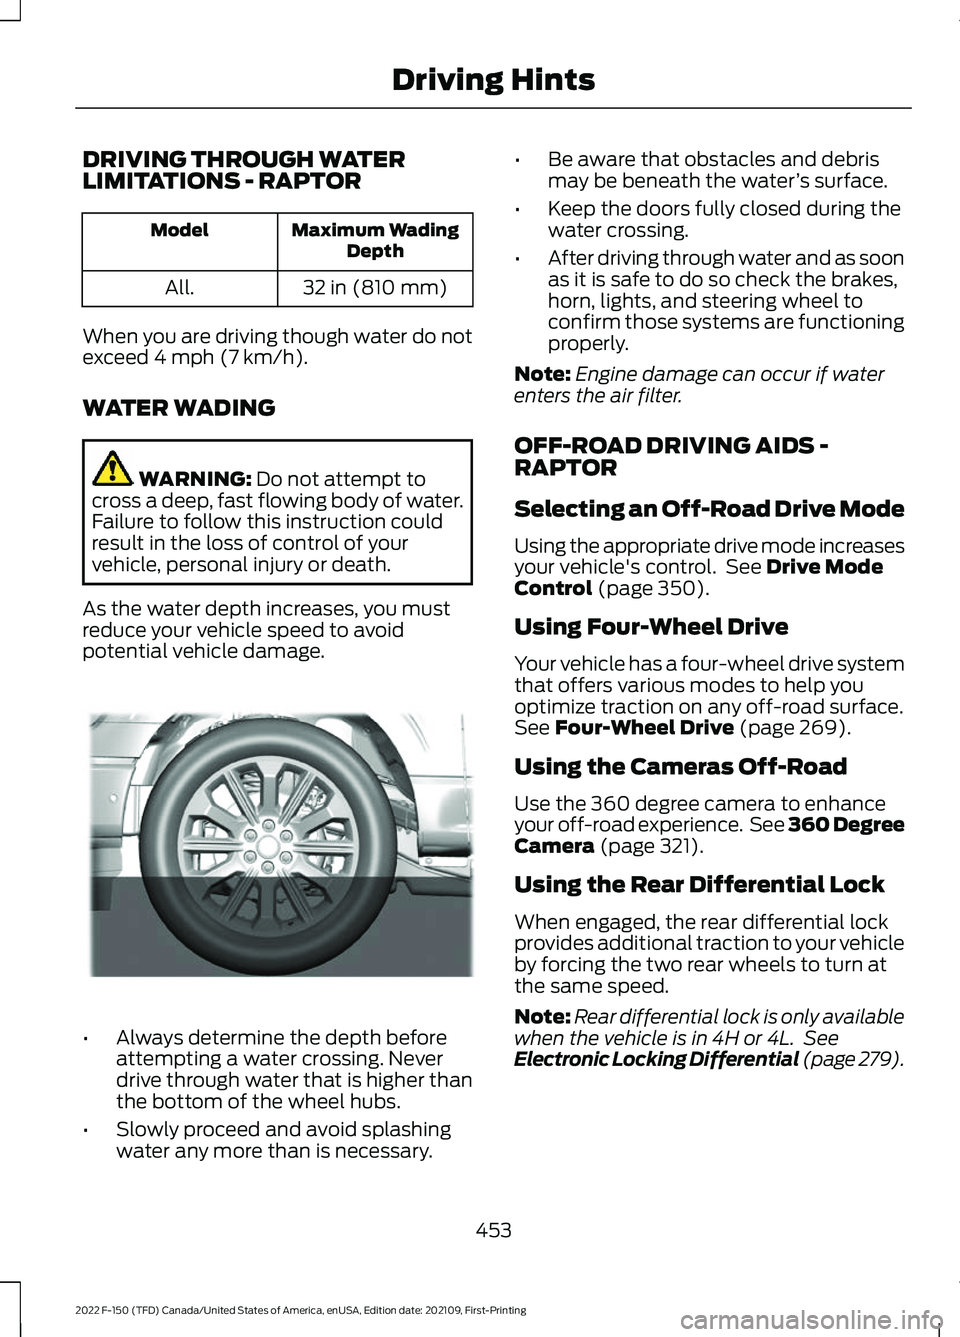 FORD F-150 2022 Service Manual DRIVING THROUGH WATER
LIMITATIONS - RAPTOR
Maximum Wading
Depth
Model
32 in (810 mm)
All.
When you are driving though water do not
exceed 4 mph (7 km/h).
WATER WADING WARNING: 
Do not attempt to
cross